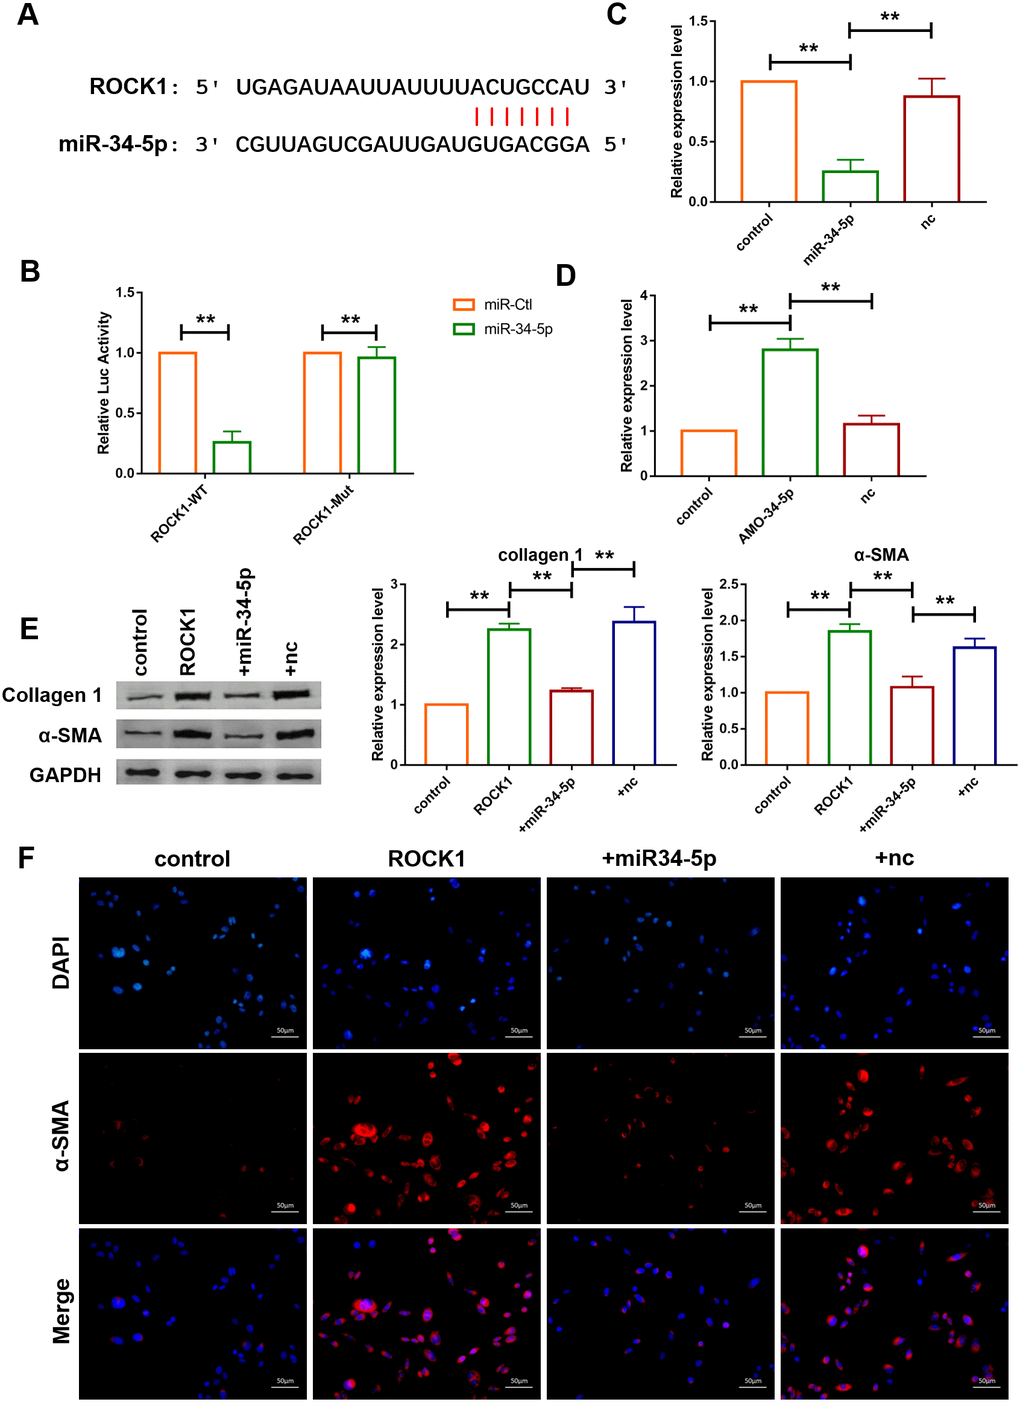 ROCK1 was a direct target of miR-34-5p and mediated the anti-fibrotic function of miR-34-5p. (A) The predicted binding sites of ROCK1 and miR-34-5p. (B) Luciferase reporter activities of chimeric vectors carrying the luciferase gene and a fragment of the 3’ UTR of ROCK1 containing the wild type or mutant miR-34-5p binding sites. Data was presented as mean ± SEM; two-tailed t test was used for the statistical analysis. n=5 independent cell cultures. (C, D) qRT-PCR analysis showing that overexpression of miR-34-5p inhibited the mRNA level of ROCK1 and AMO-34-5p transfection elevated the mRNA level of ROCK1; GAPDH mRNA served as an internal control. Data was presented as mean ± SEM; one-way ANOVA was used for the statistical analysis. n=5 independent cell cultures. (E) Protein levels of collagen 1 and α-SMA were measured by western blotting; GAPDH served as an internal control. Data was presented as mean ± SEM; one-way ANOVA was used for the statistical analysis. n=6 independent cell cultures. (F) Representative images of immunofluorescence staining showing that overexpression of miR-34-5p diminished fibroblast-myofibroblast transition induced by forced expression of ROCK1. Scale bars represented 50 μm. **P